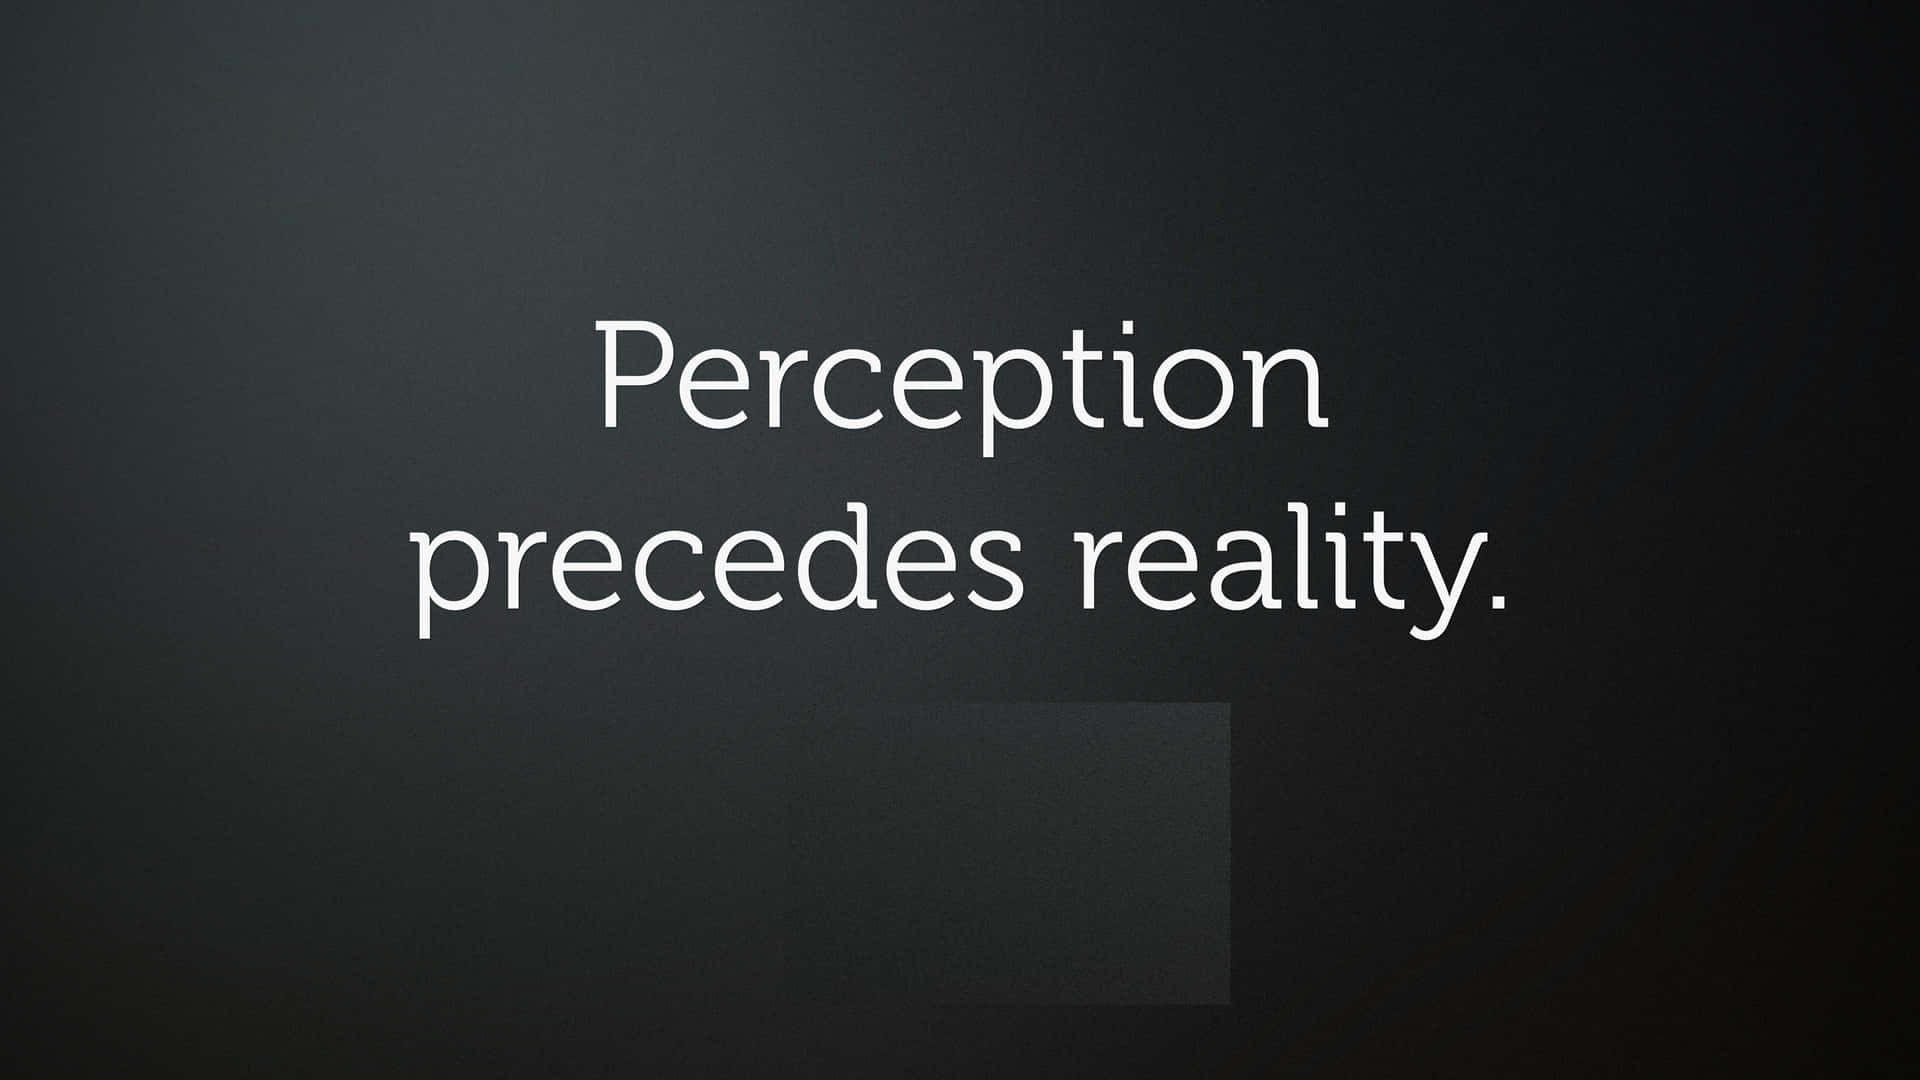 Abstract Perception Artwork in High Resolution Wallpaper